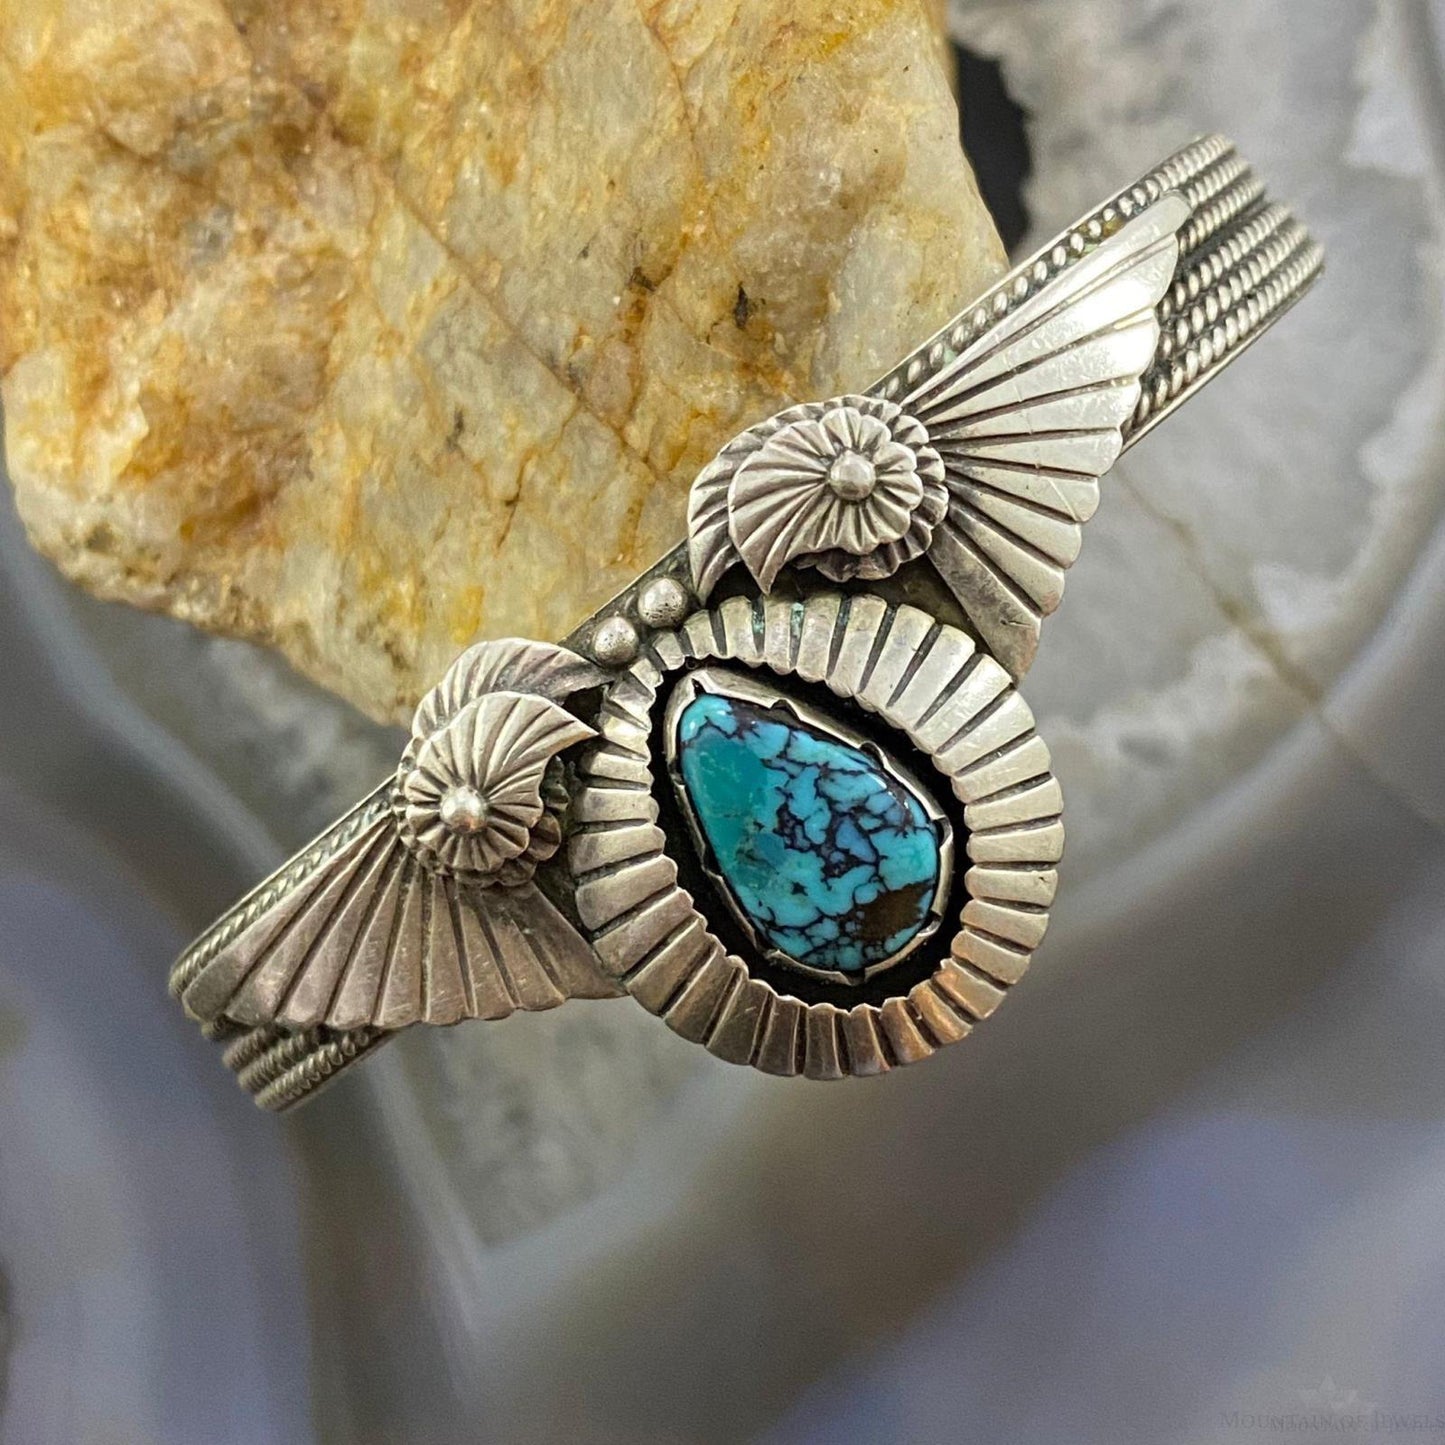 Vintage Native American Silver Teardrop Turquoise Decorated Bracelet For Women